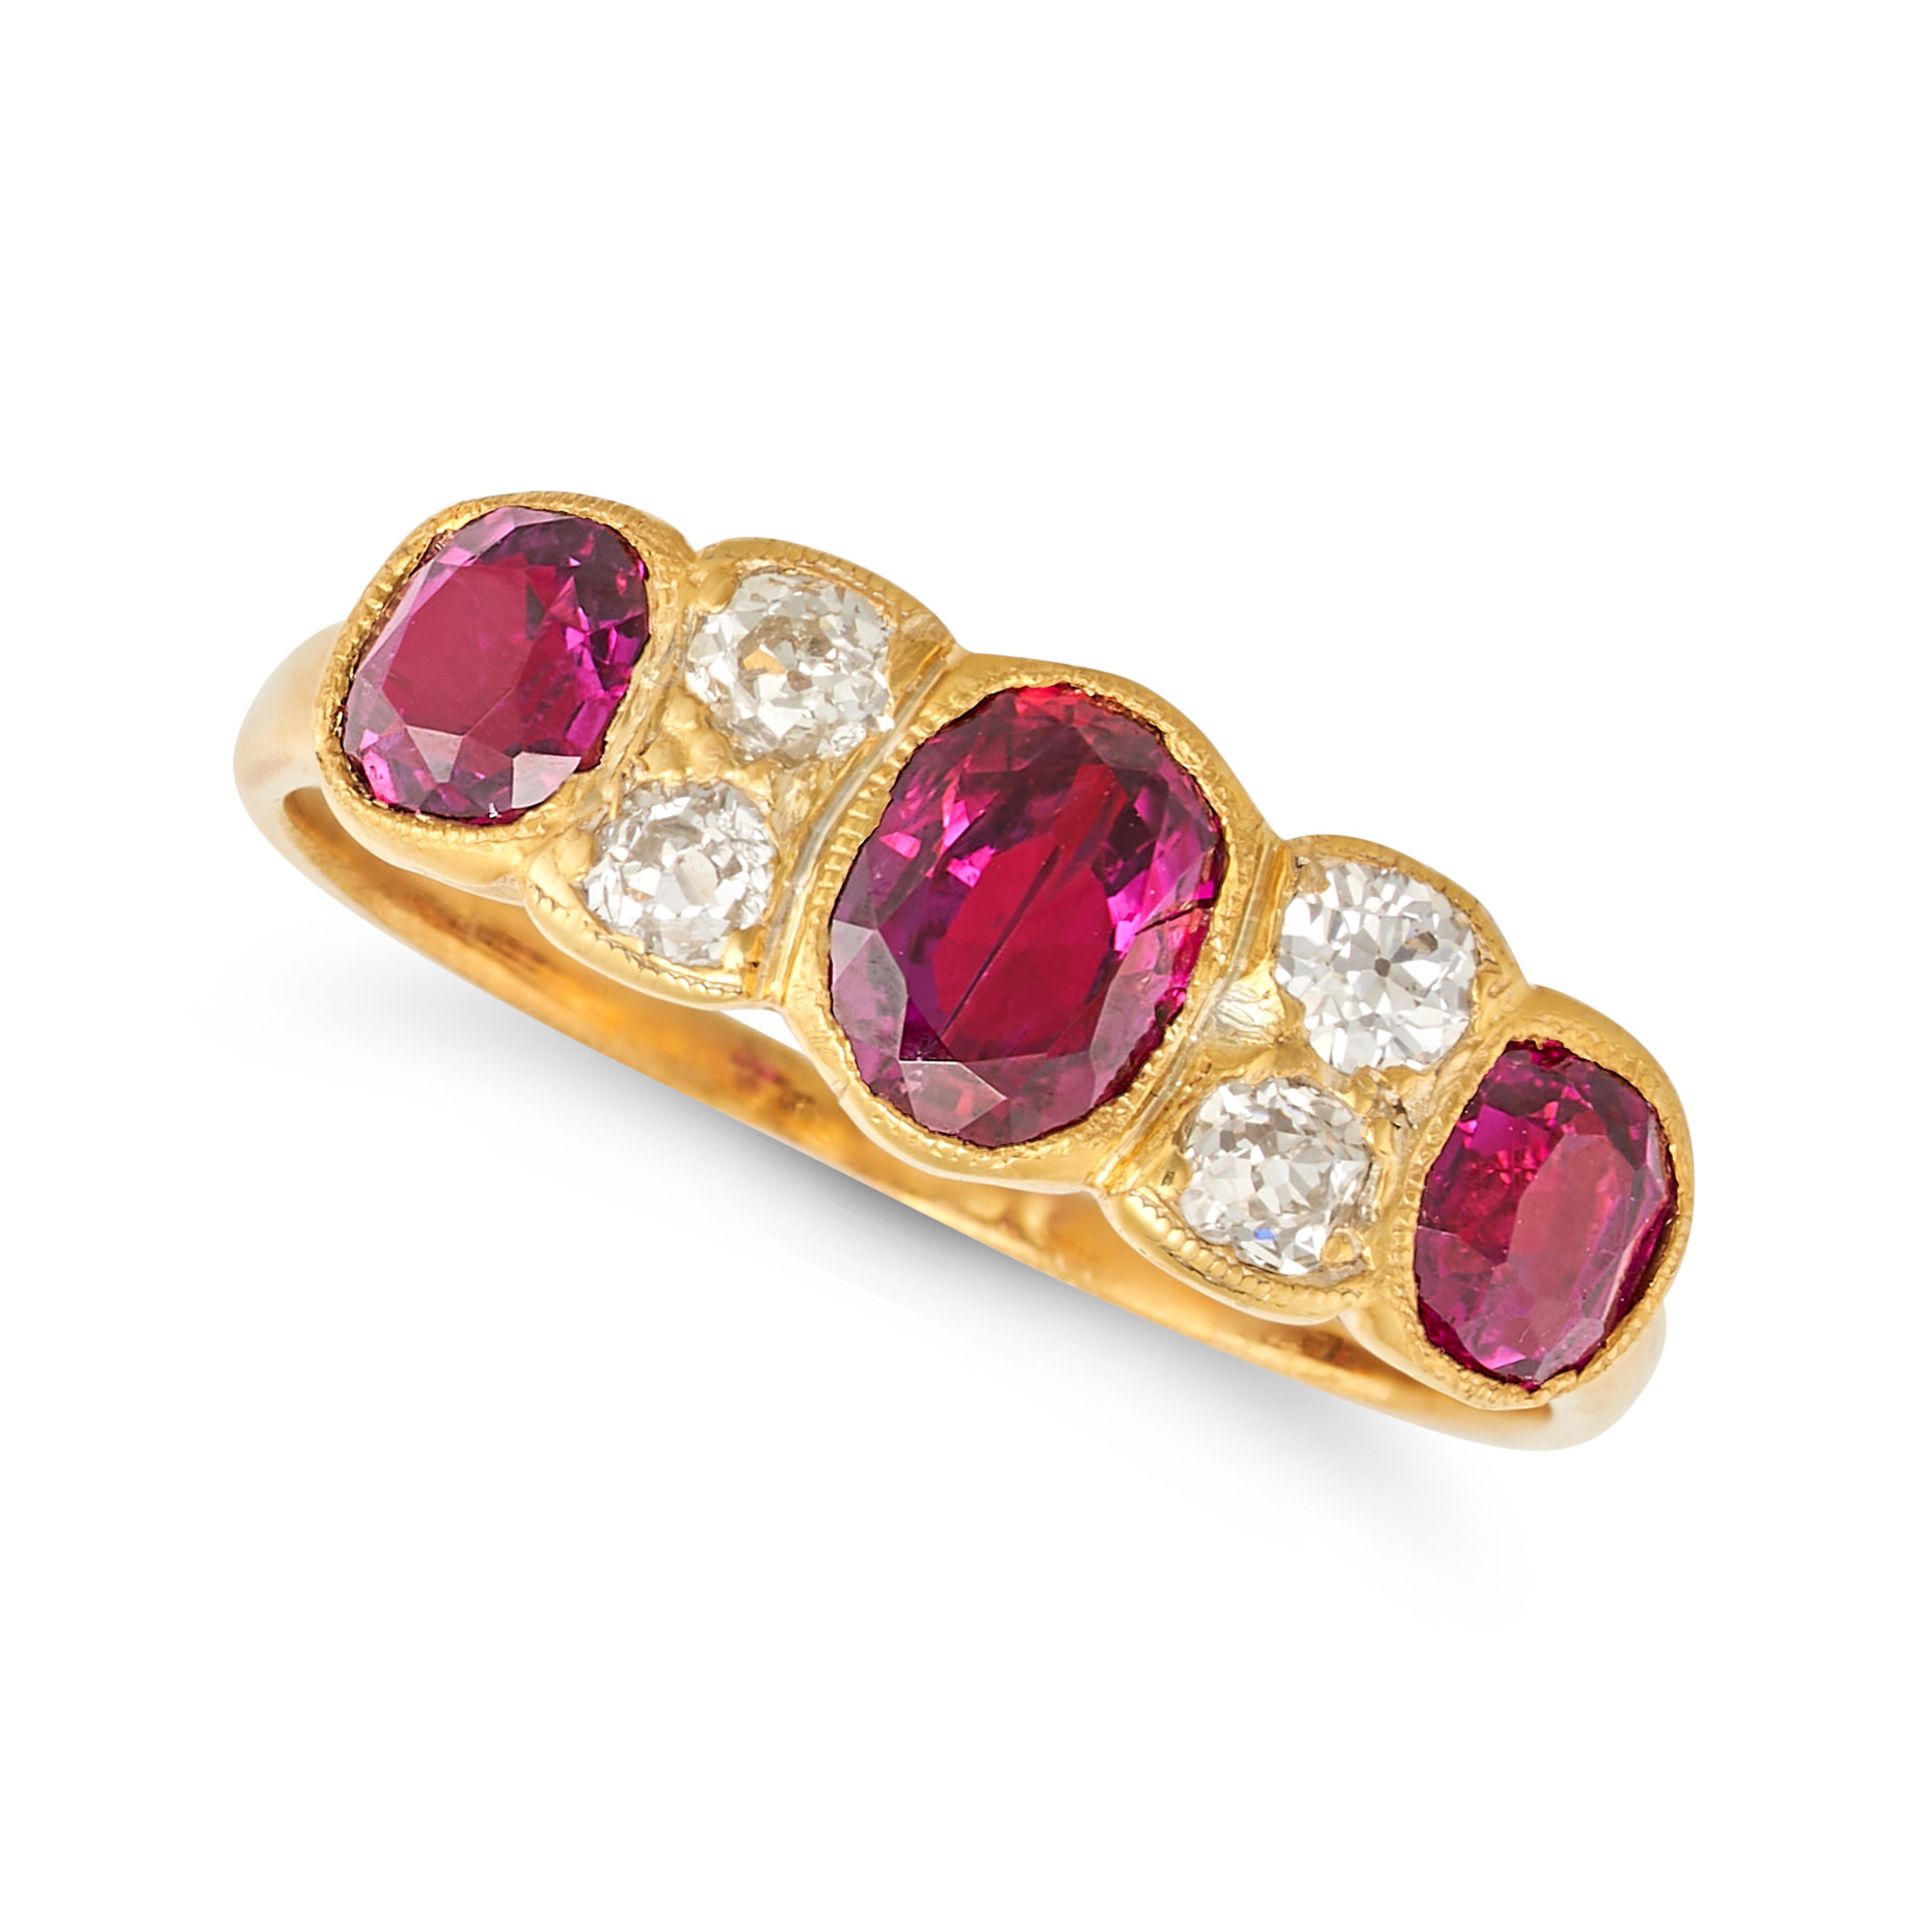 A RUBY AND DIAMOND RING in 18ct yellow gold, set with three oval cut rubies punctuated by pairs o...